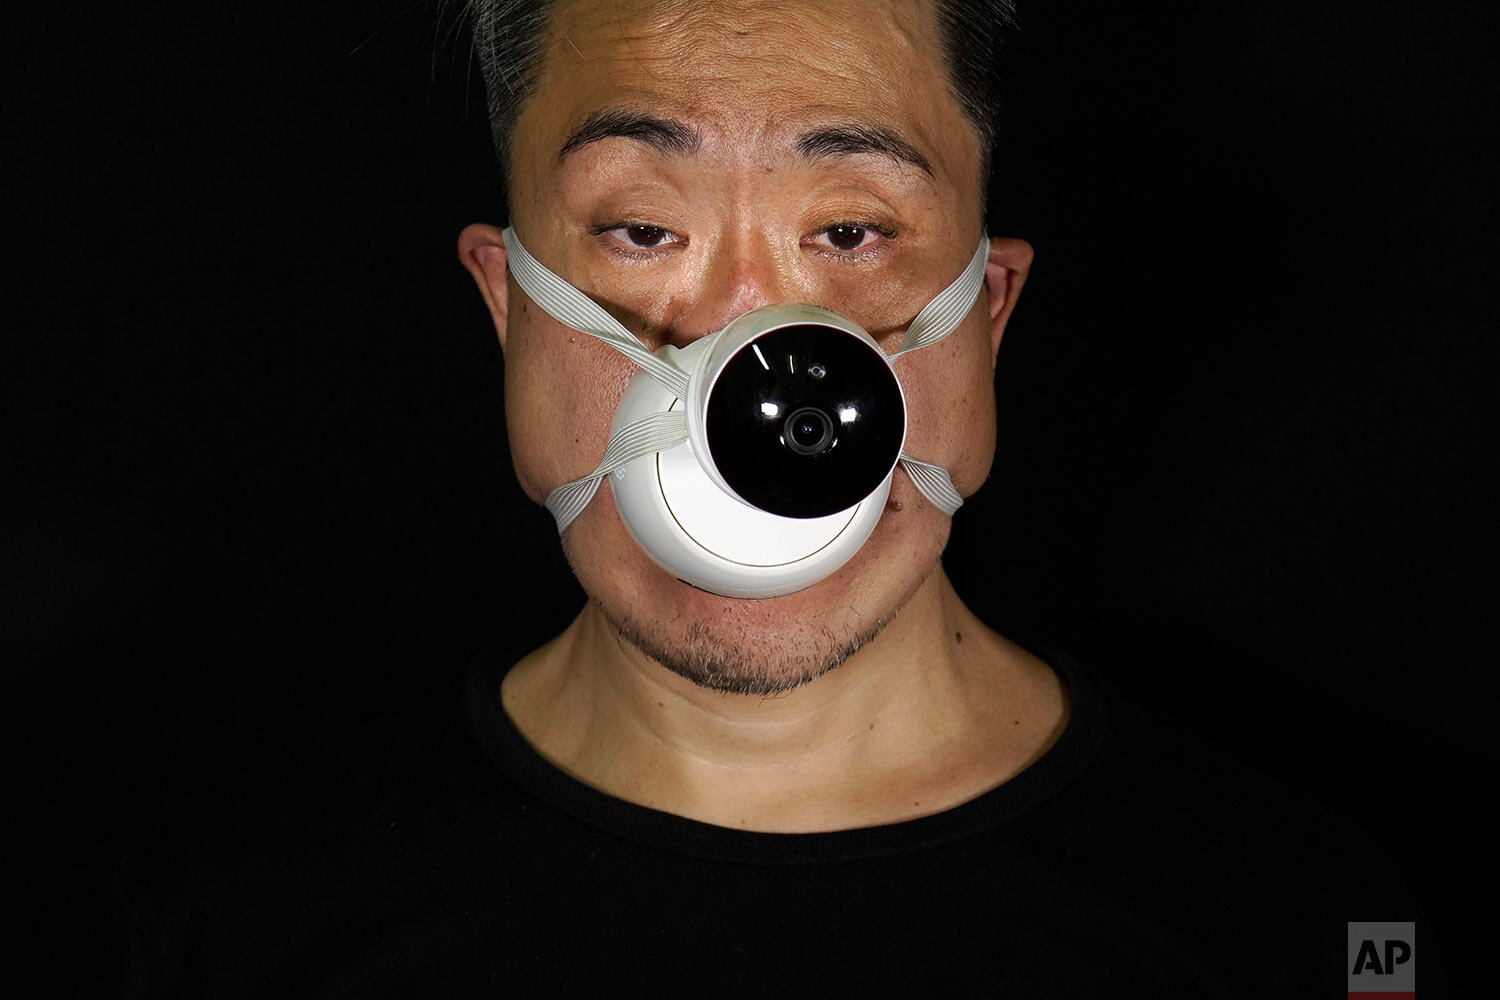  Edmond Kok, a Hong Kong theater costume designer and actor, wearing a face mask with a model CCTV (close circuit television) mounted on it in Hong Kong Thursday, Aug. 6, 2020.  (AP Photo/Vincent Yu) 